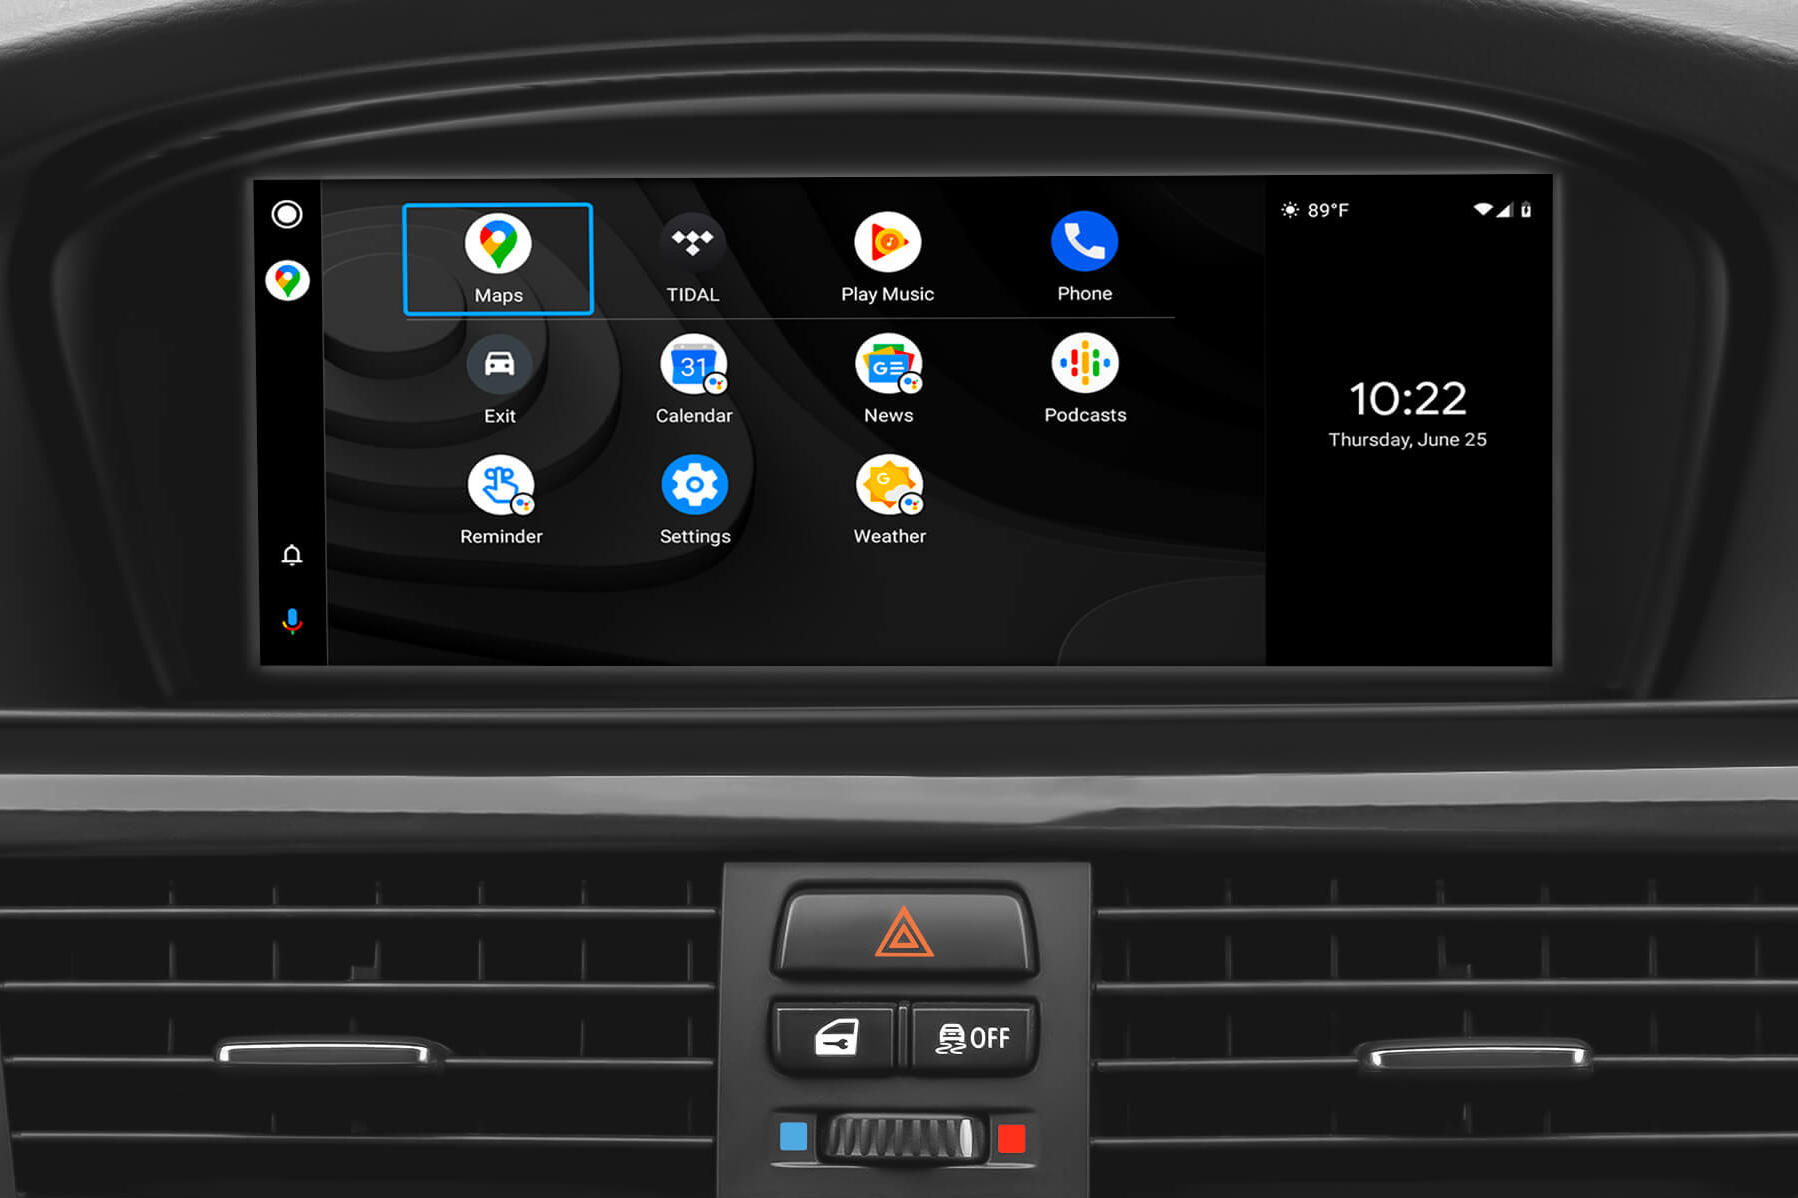 Android Auto Update